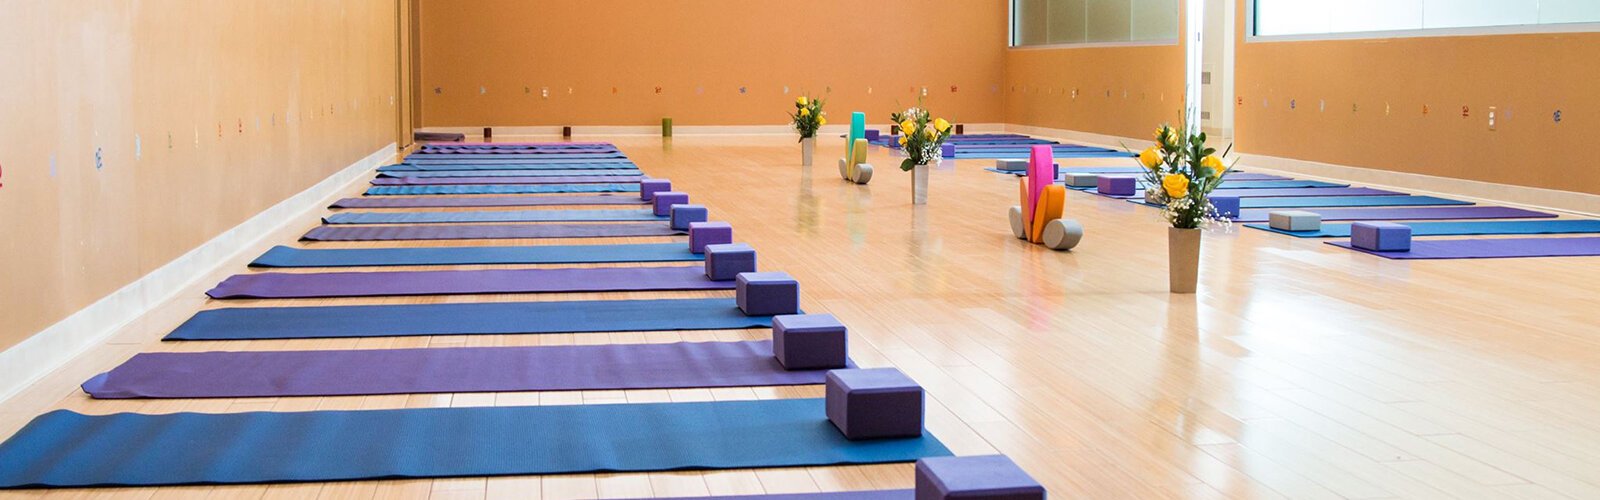 Metro Detroit's yoga community finds breathing space online during